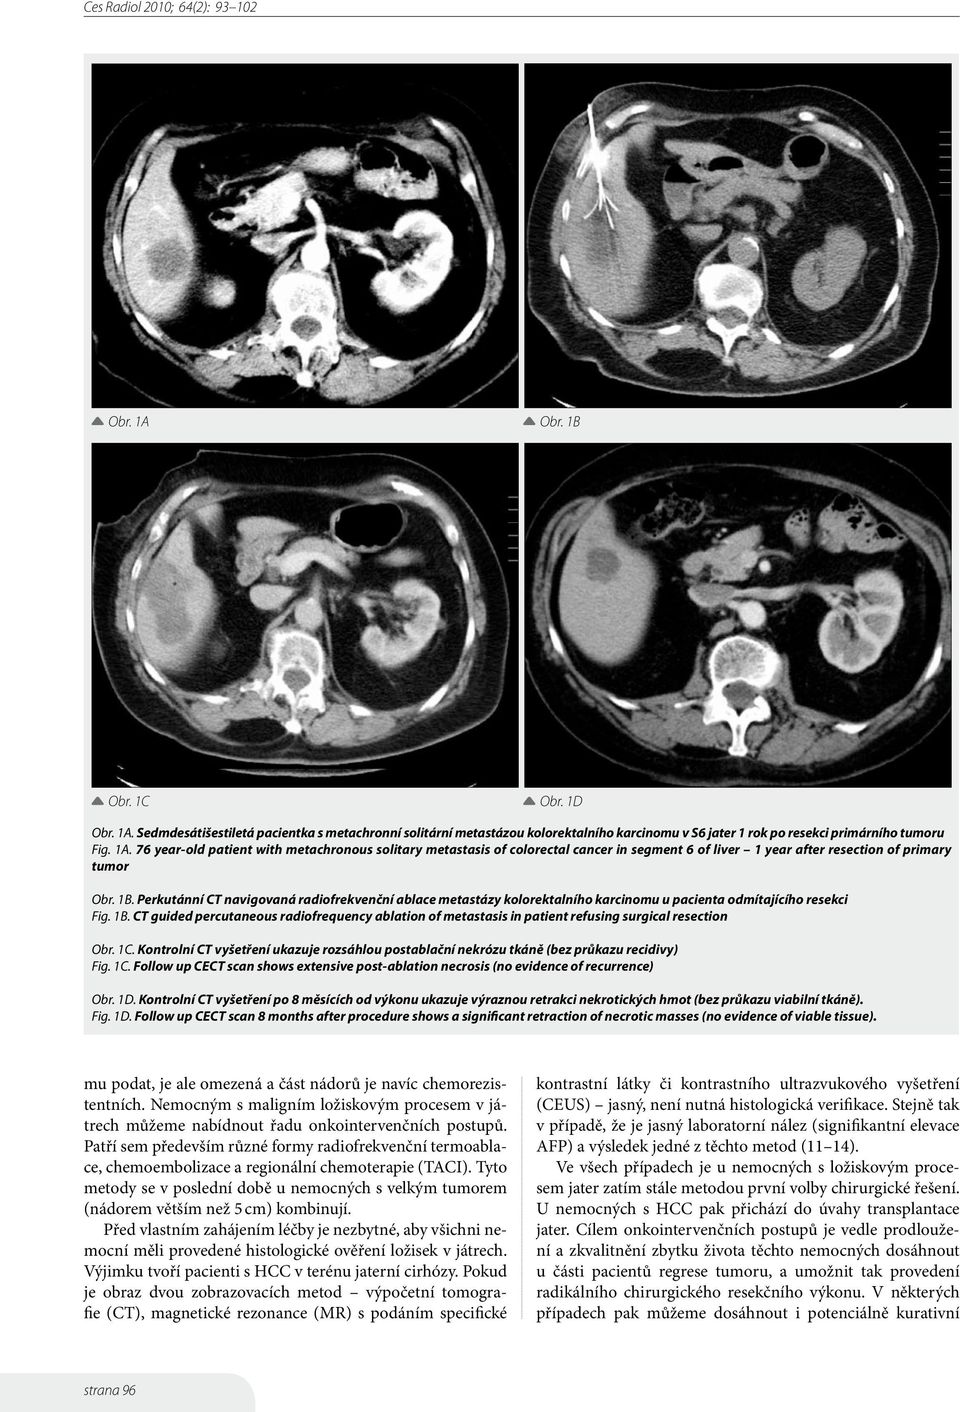 CT guided percutaneous radiofrequency ablation of metastasis in patient refusing surgical resection Obr. 1C.